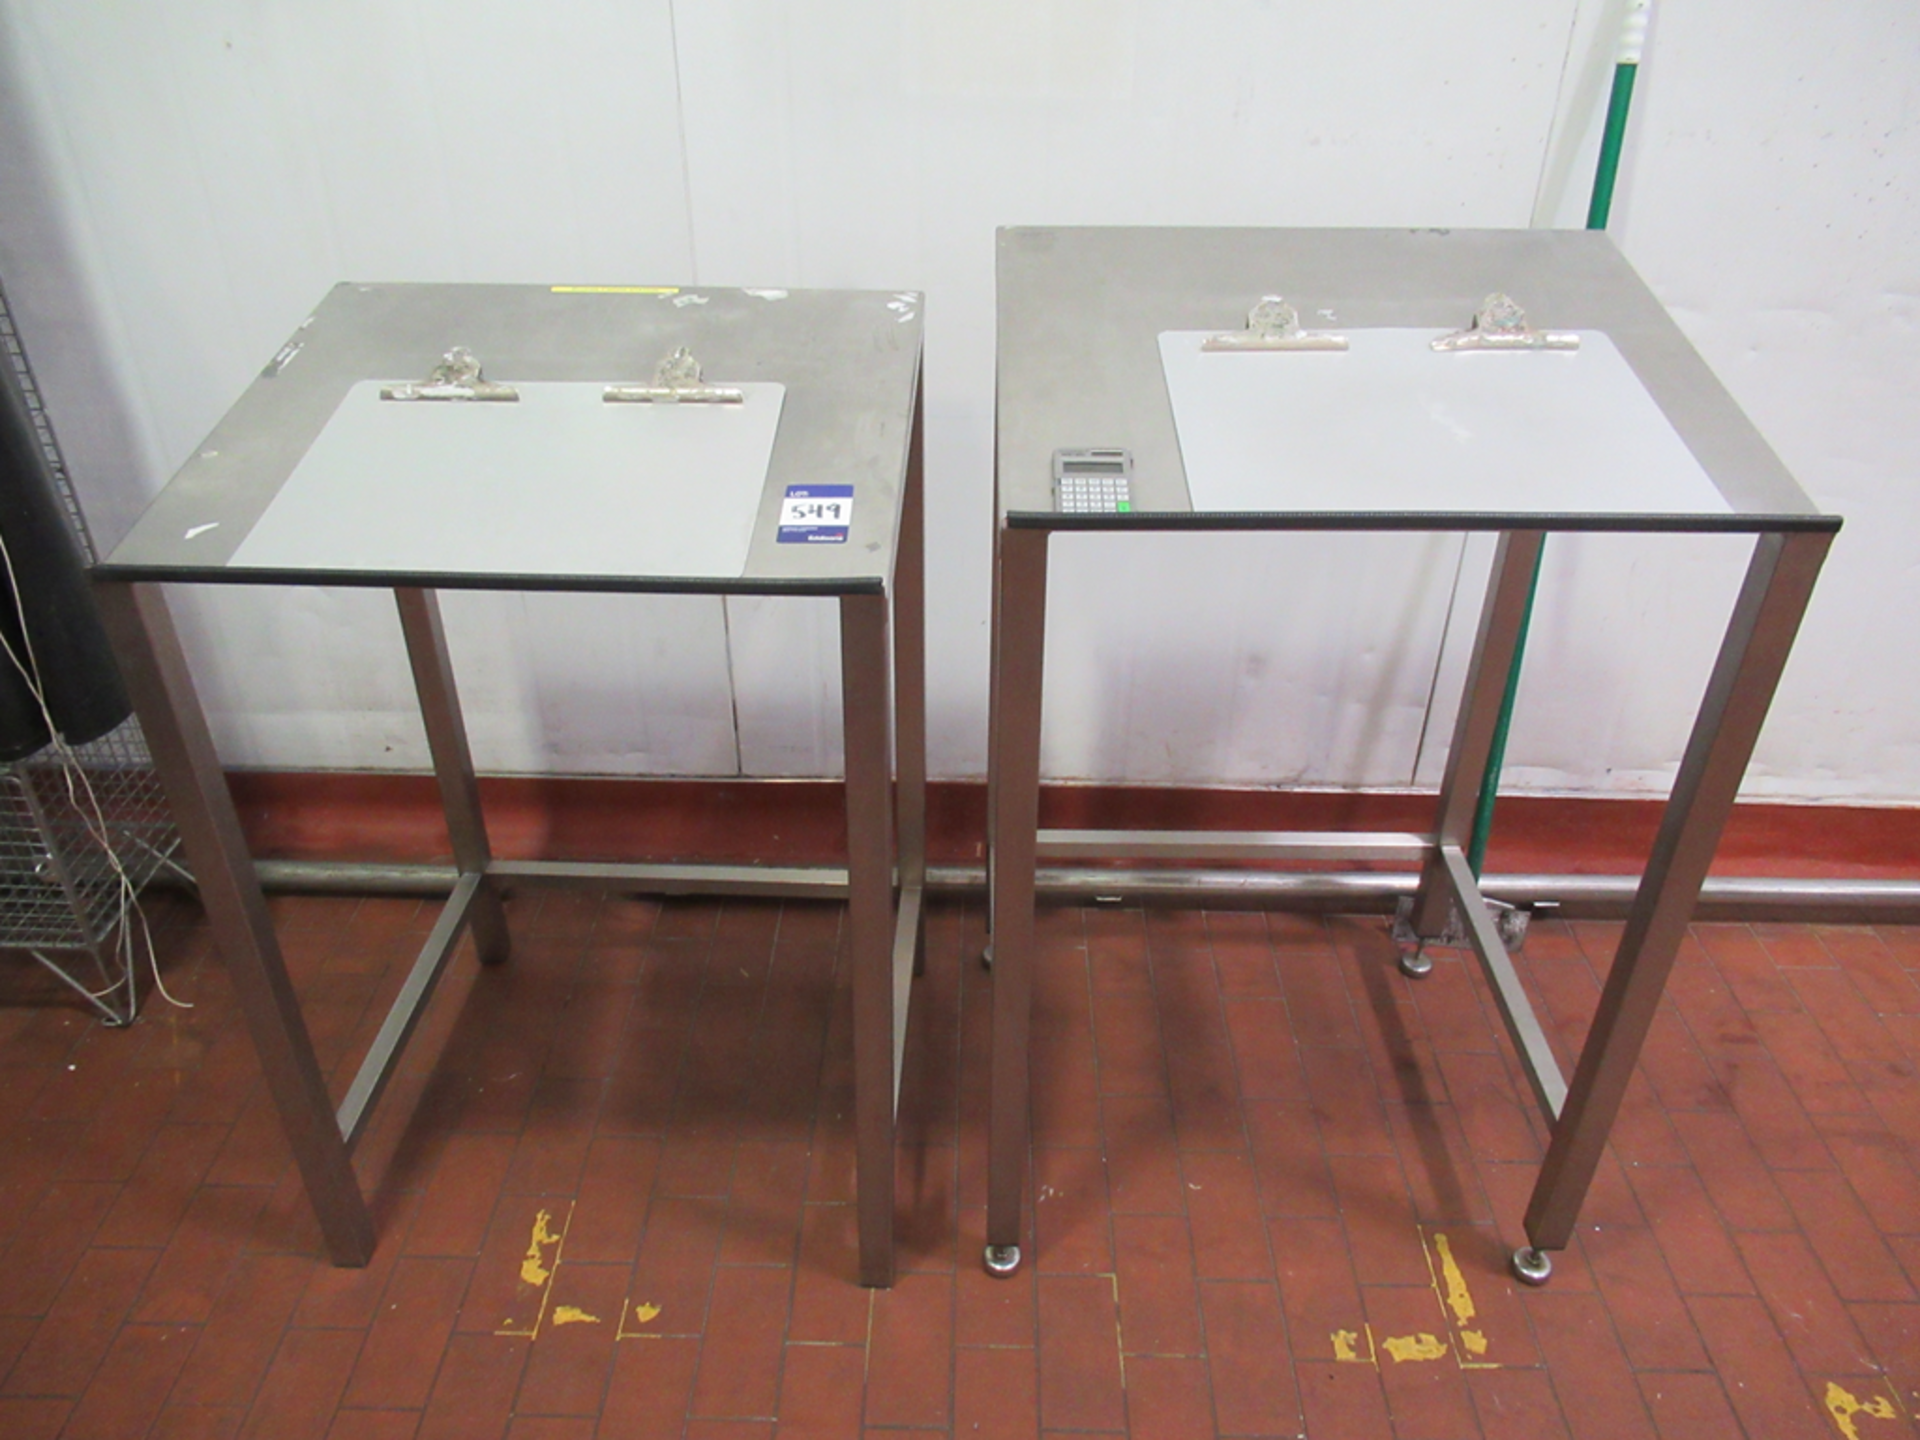 3 x s/s Teknomek Work Stations and 2 x Storage Cages